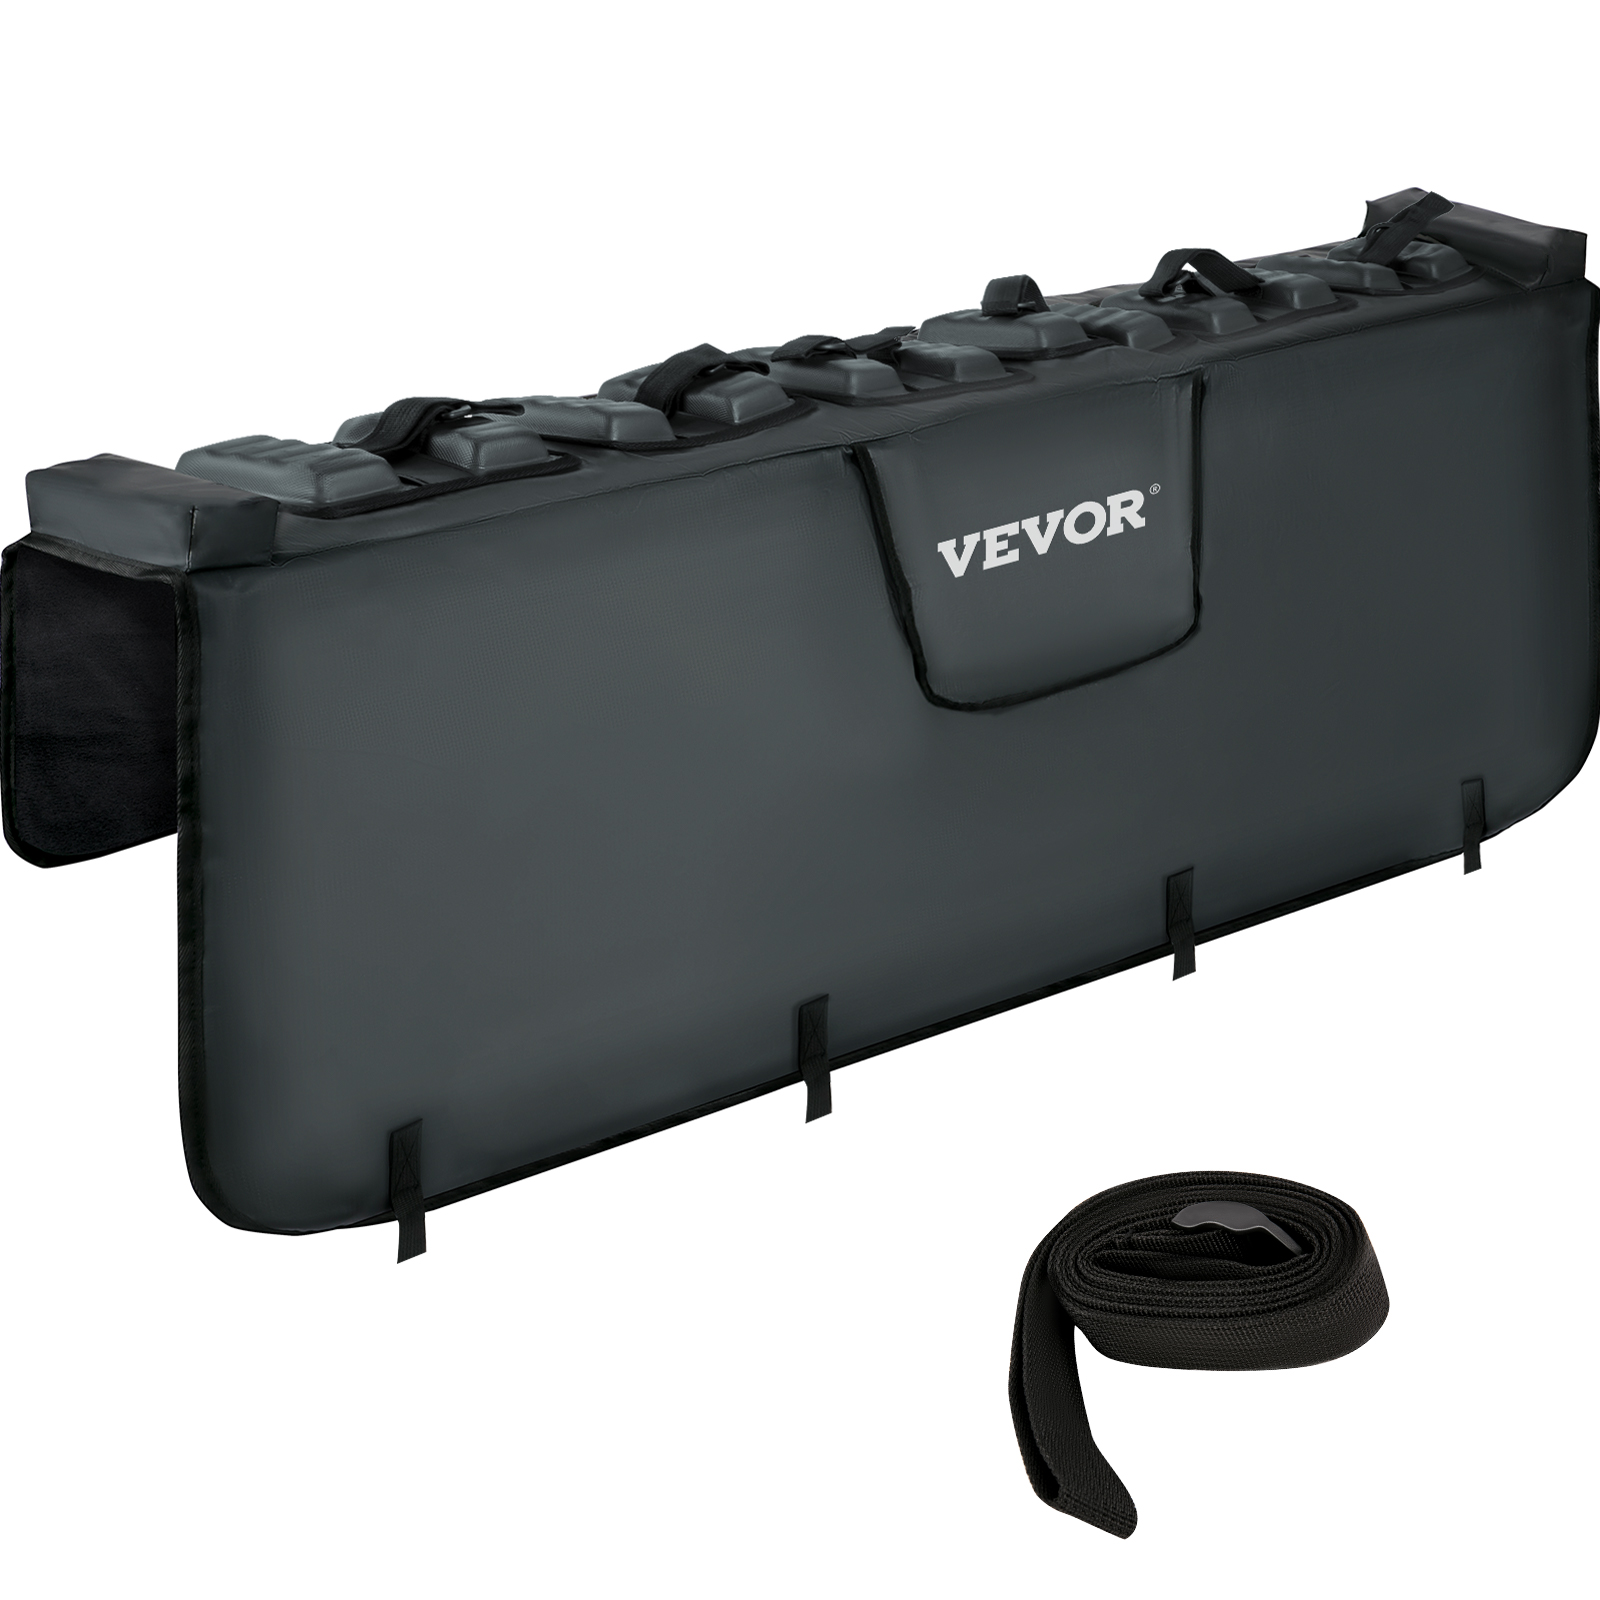 Vevor 63"w Pickup Truck Bed Tailgate Cover Crash Pad Protector Waterproof от Vevor Many GEOs